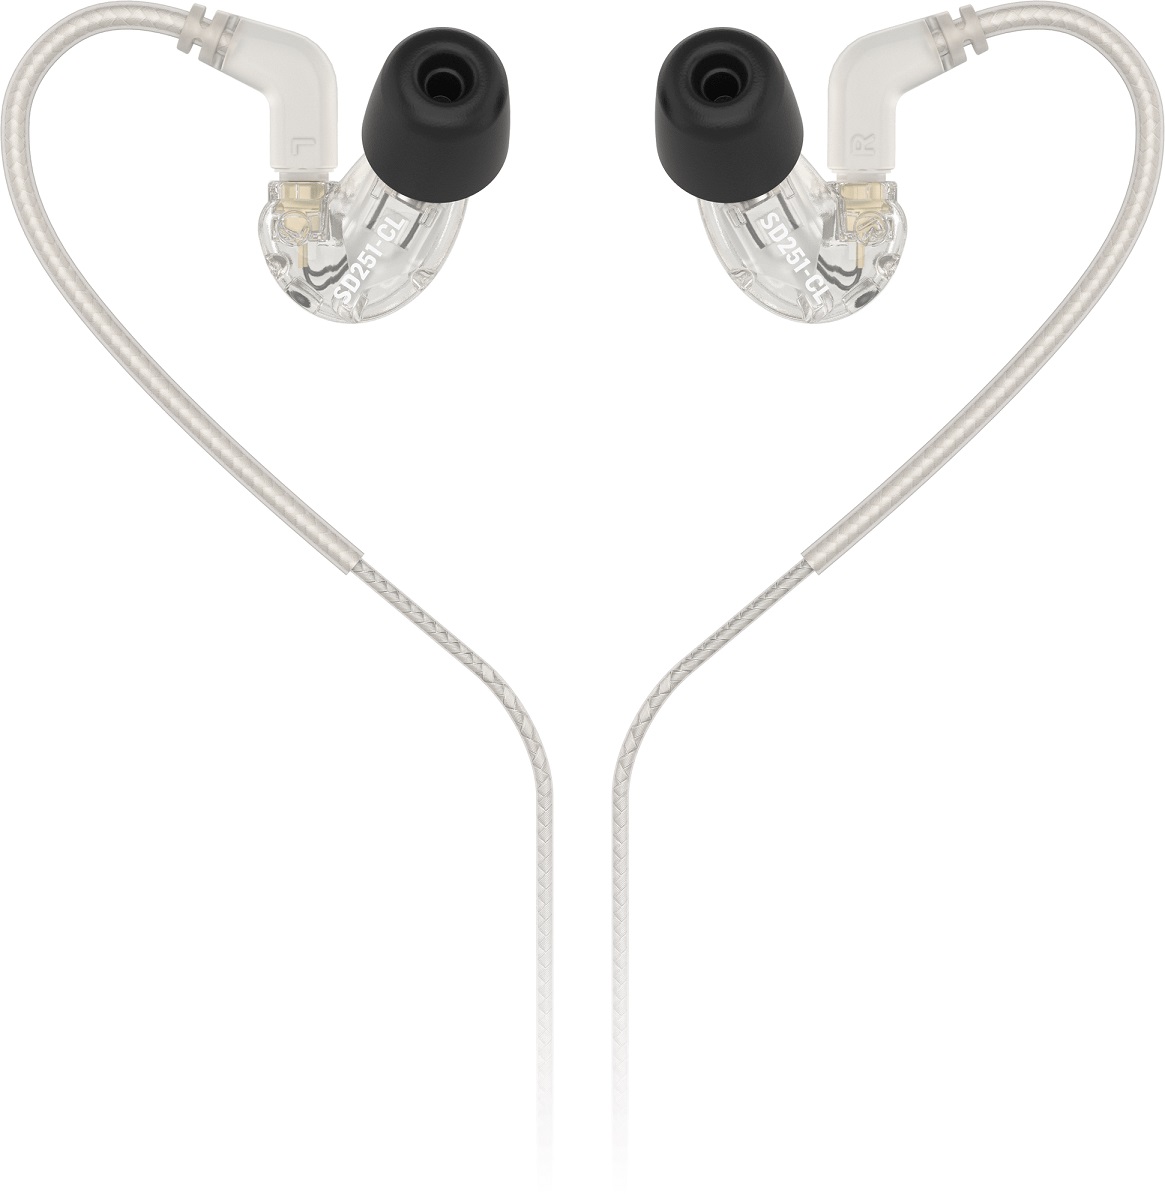 BEHRINGER SD251-CL AURICOLARE IN EAR MONITOR CLEAR TRASPARENTE 2